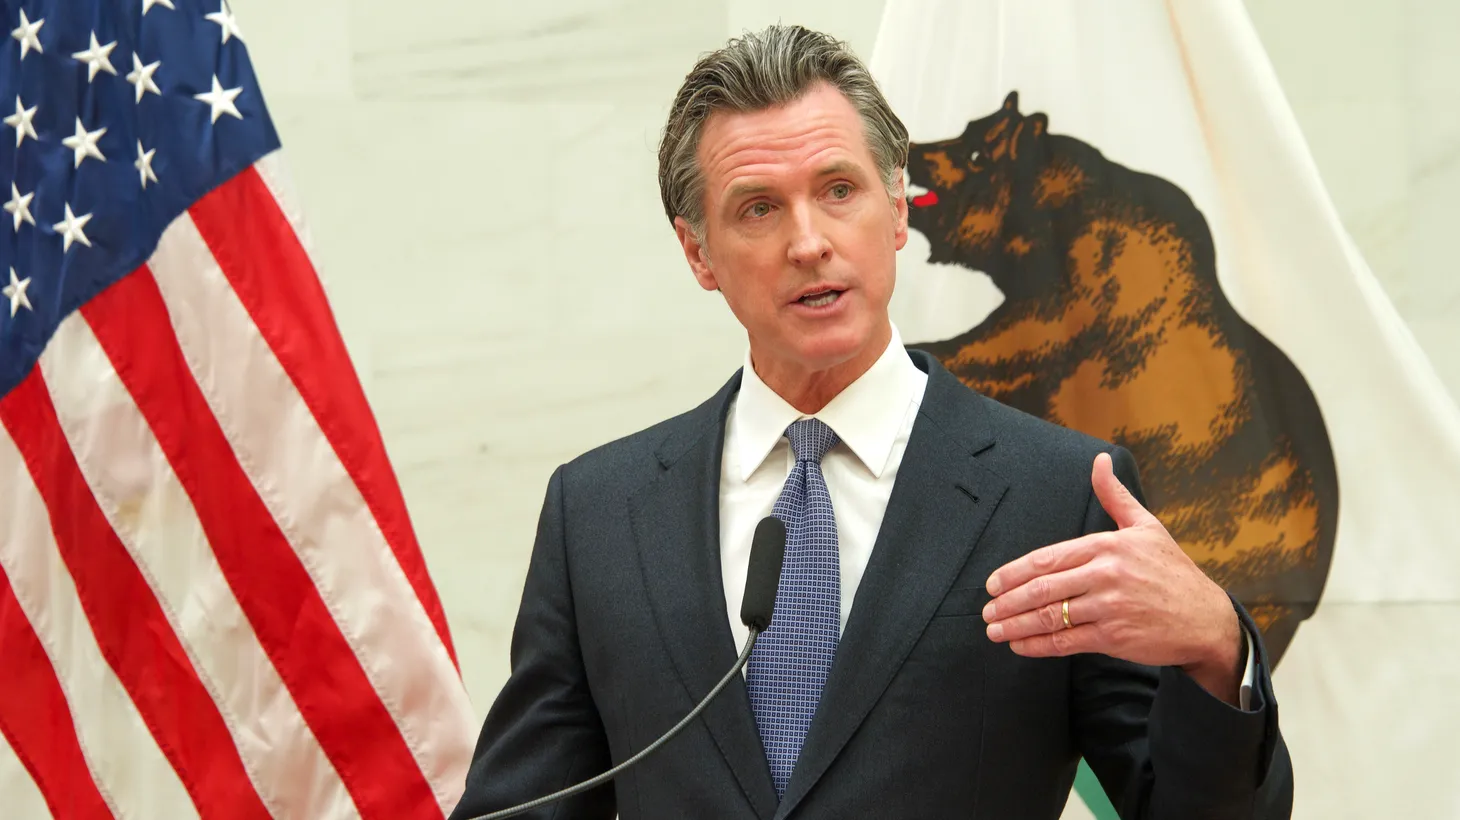 In signing 10 new cannabis laws, Governor Gavin Newsom “noted that he wanted to strengthen legalization in California, expand the opportunities of it, and redress the harms of the war on drugs,” says Leafly Senior Editor David Downs.